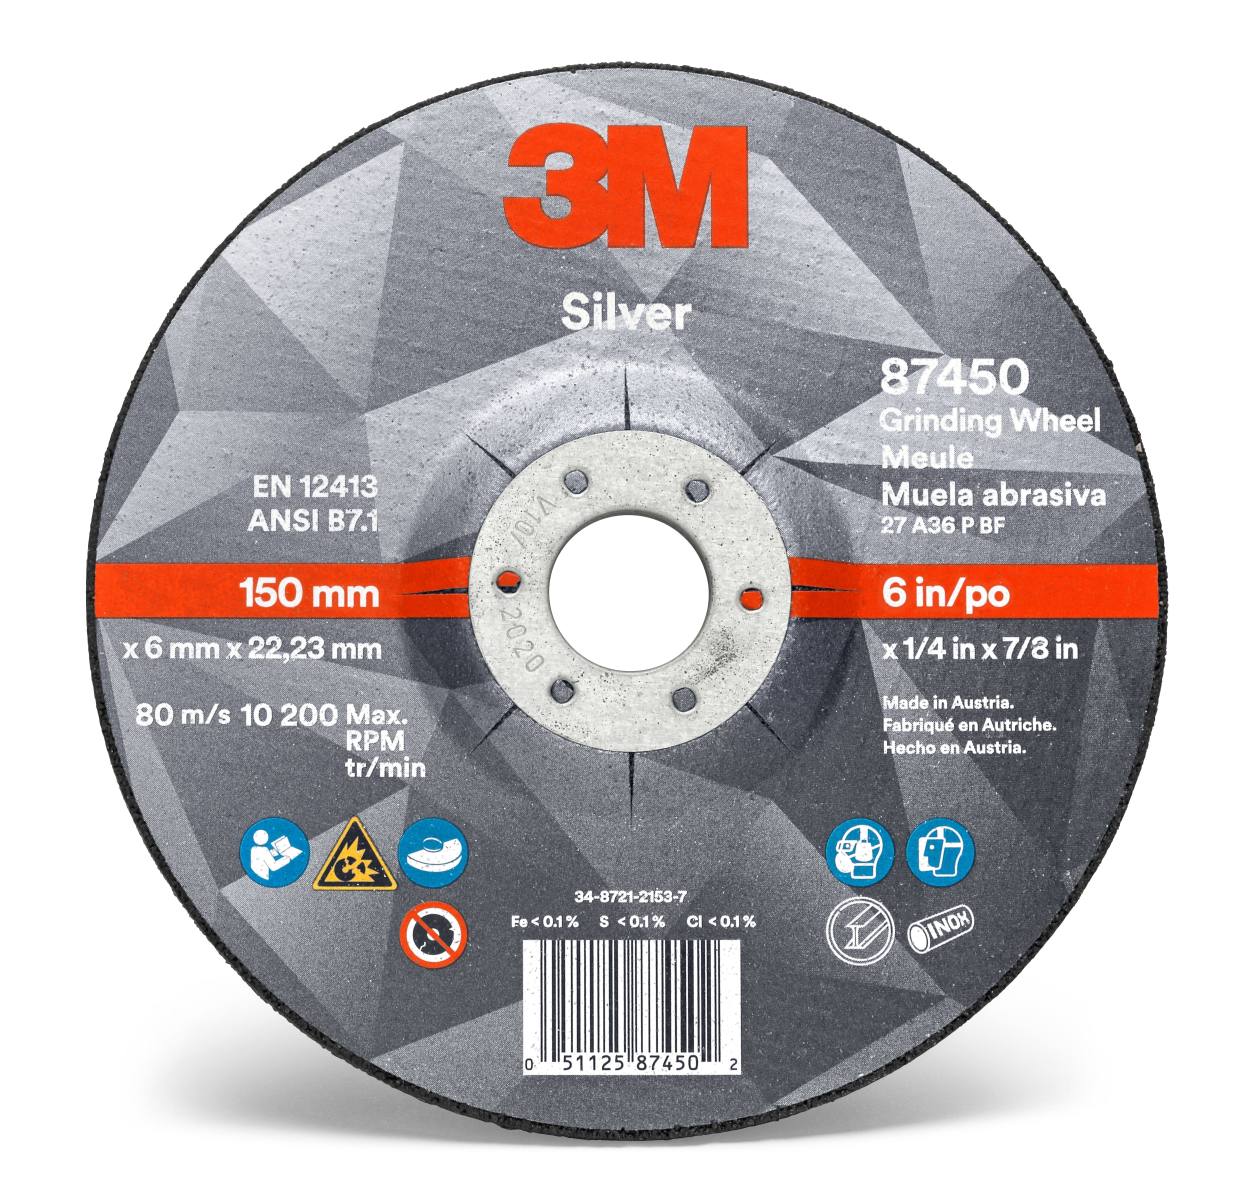 3M Silver grinding disc, 115 mm, 7.0 mm, 22.23 mm, type 27